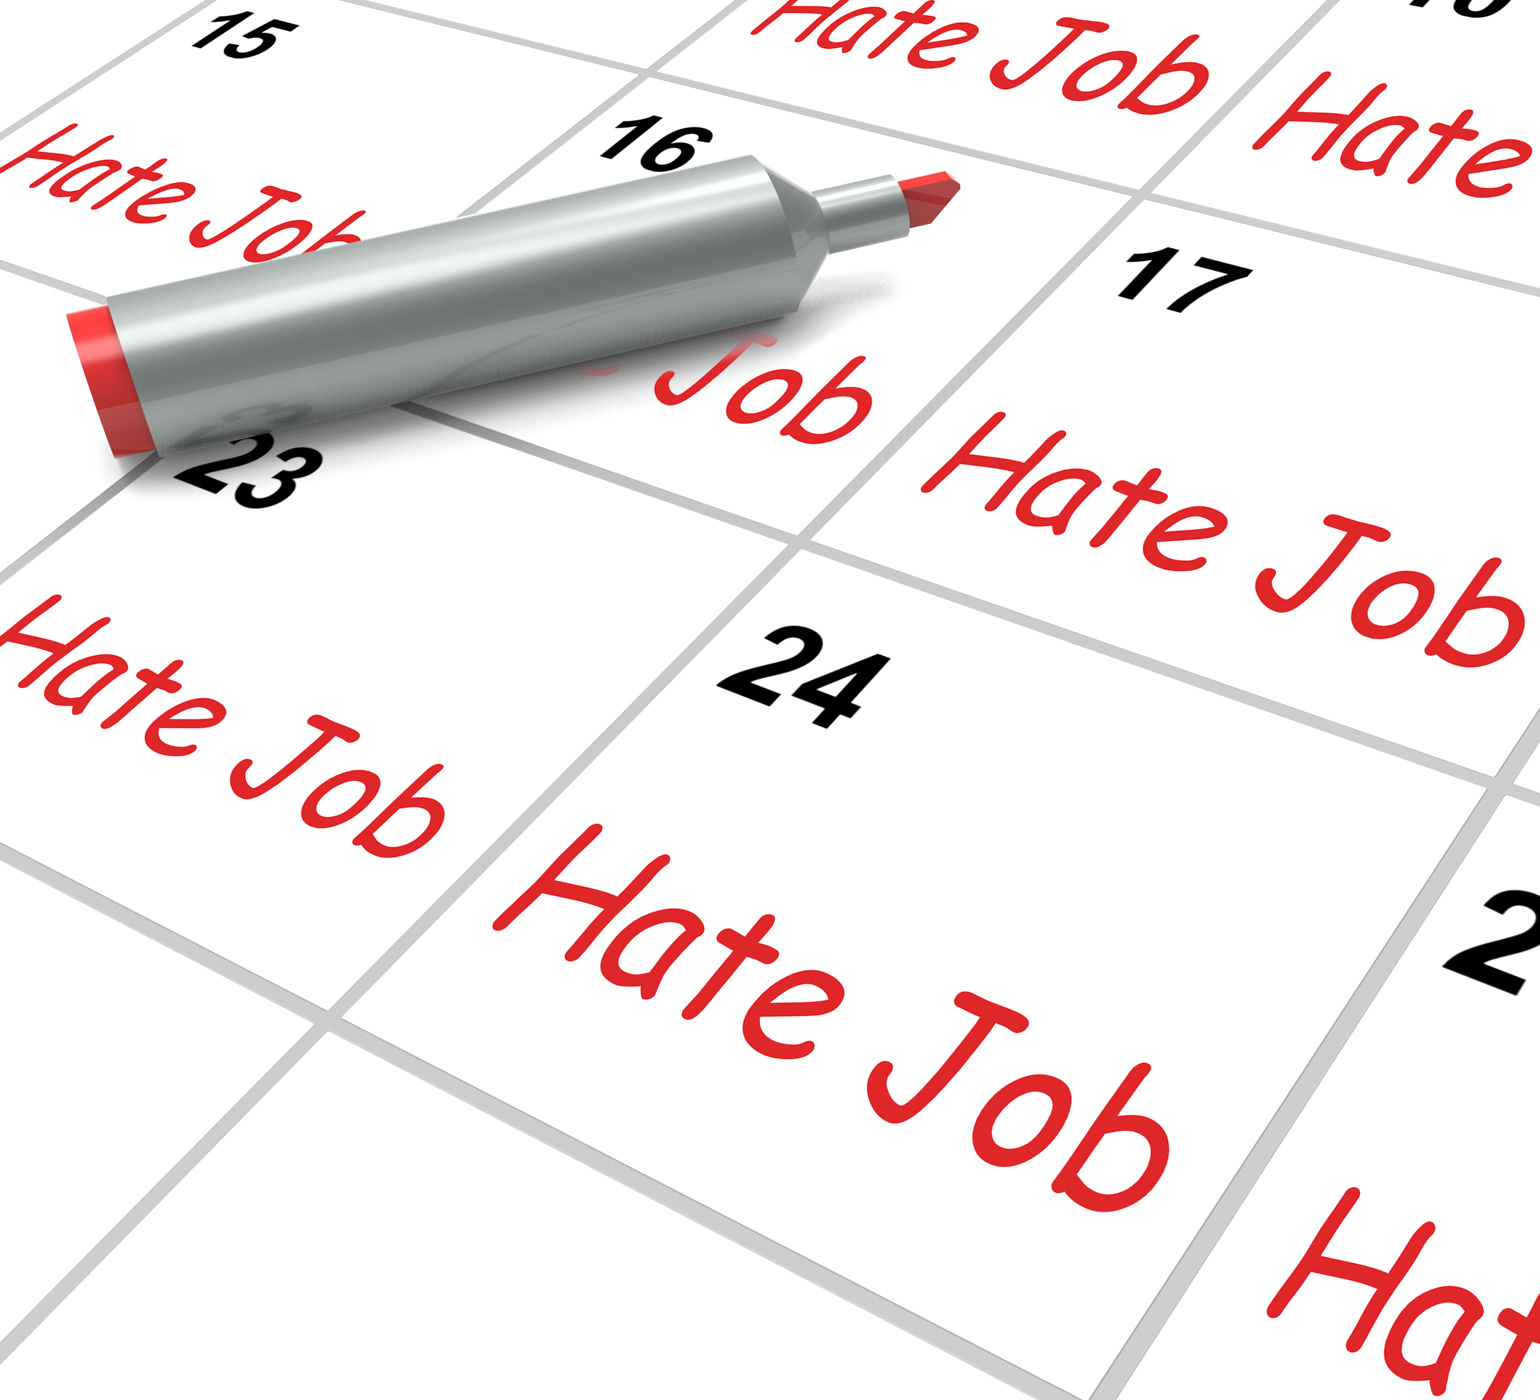 Hate job calendar means miserable at work photo